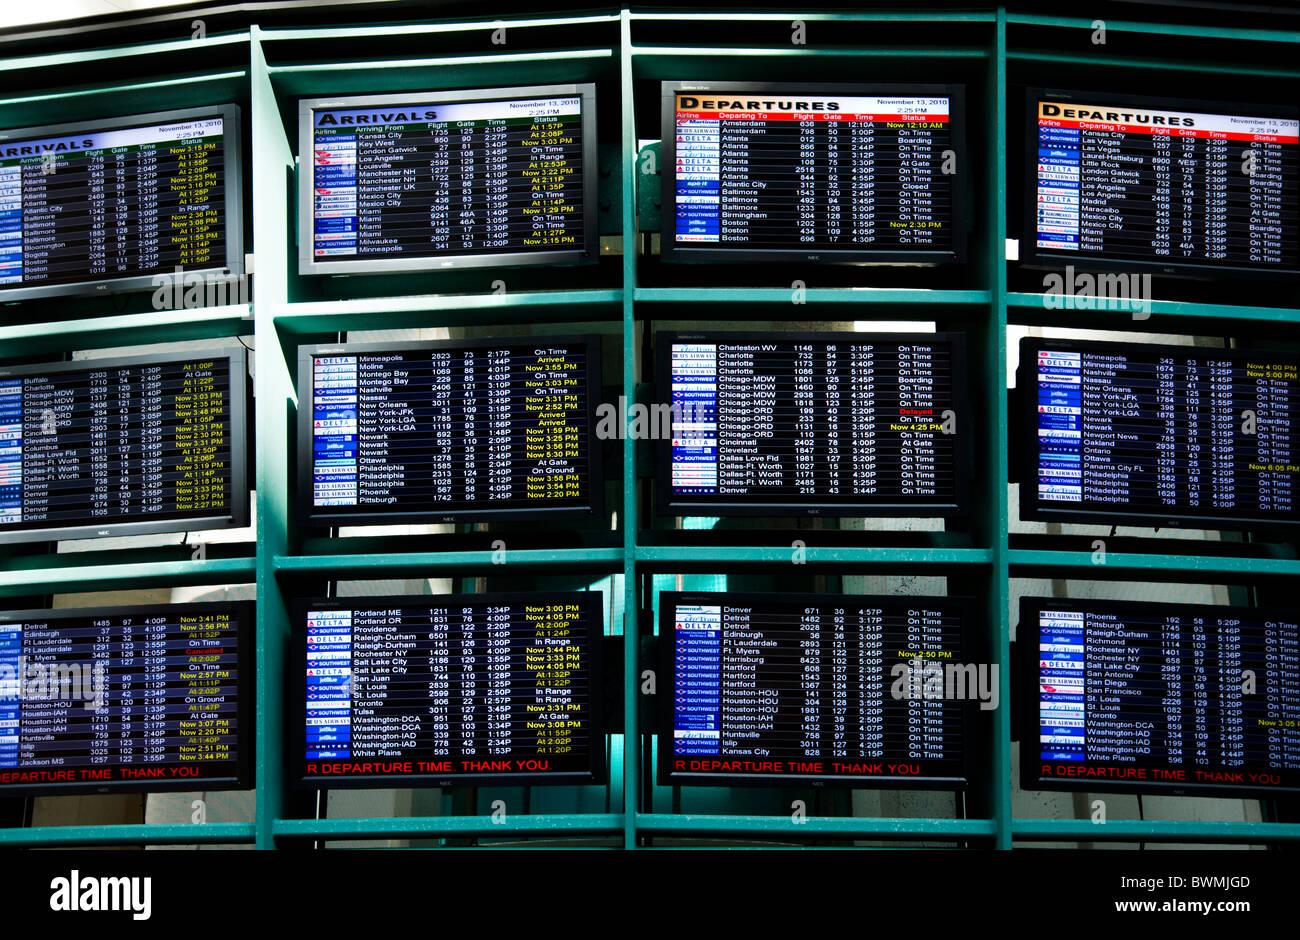 Flight Arrivals and Departures boards at Orlando International Airport, Florida, USA Stock Photo